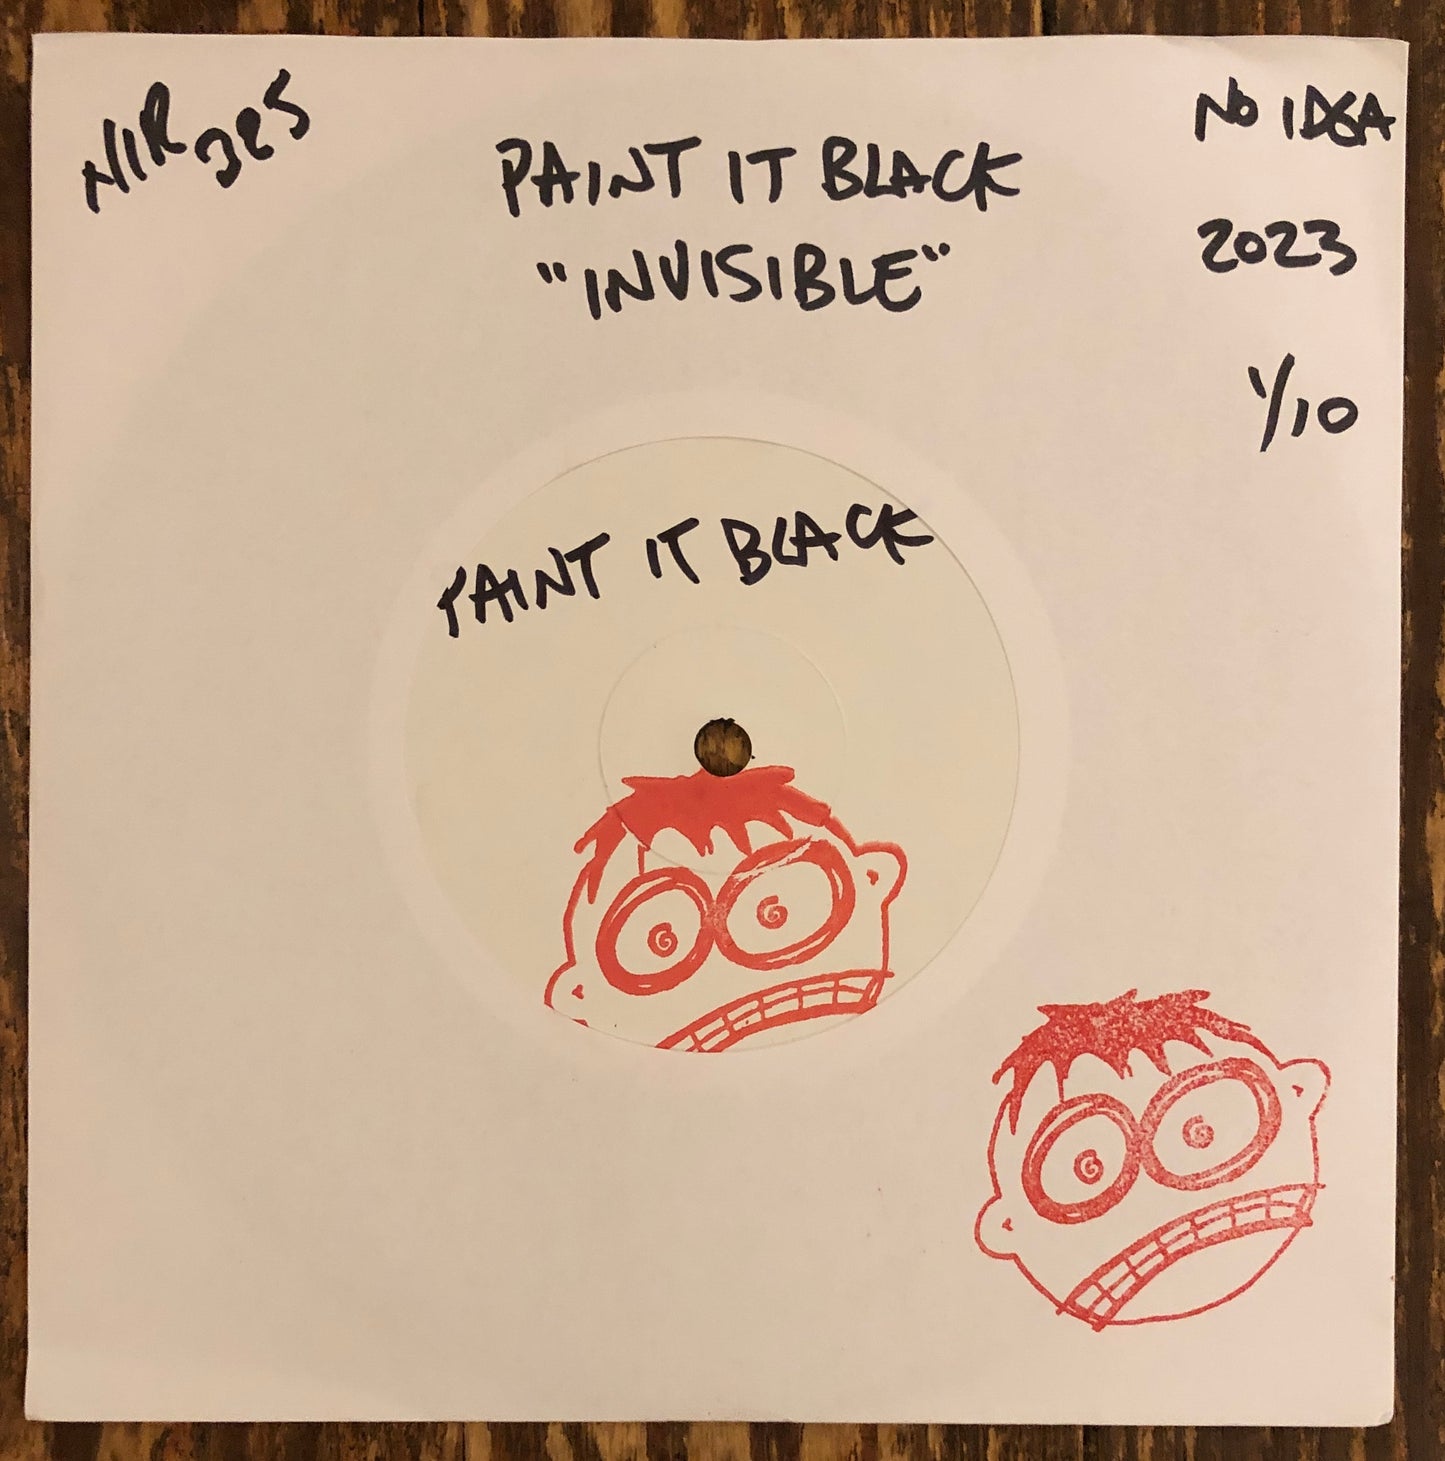 PAINT IT BLACK "Invisible" TEST PRESSING